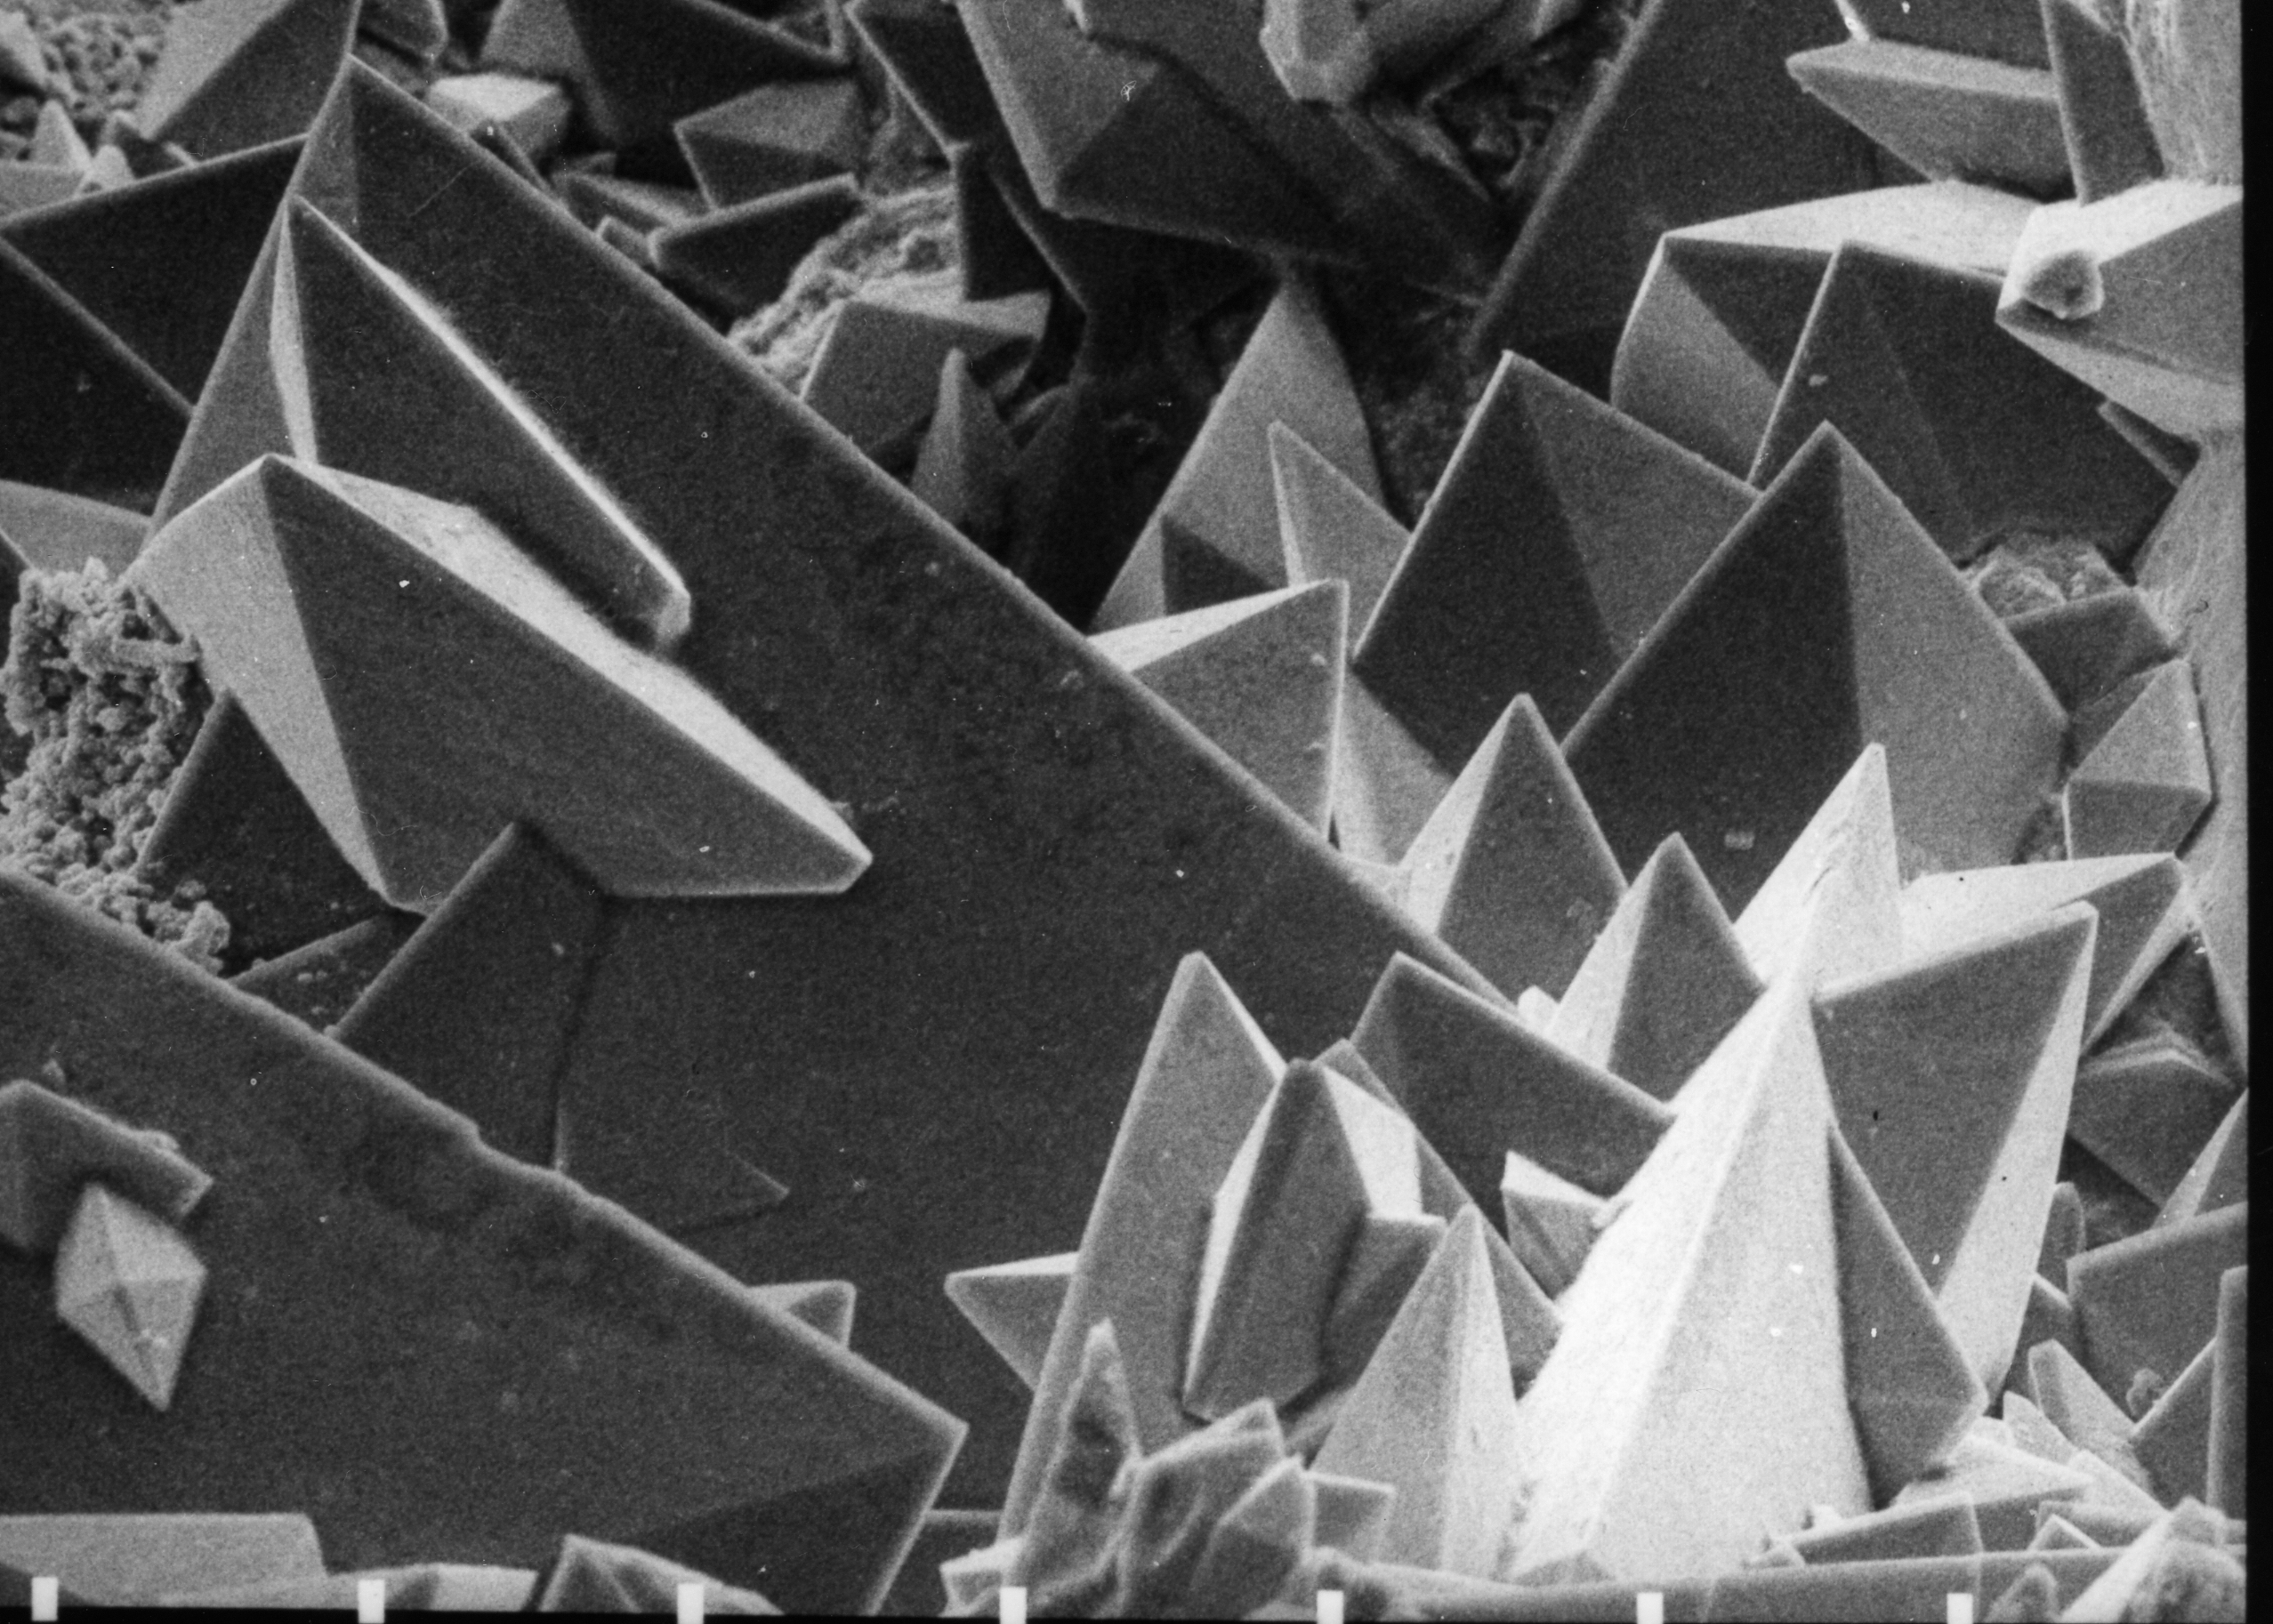 Calcium oxalate dihydrate crystals under Scanning Electron Micrograph (SEM) taken at 30 KV. Source: Wikimedia commons[19]